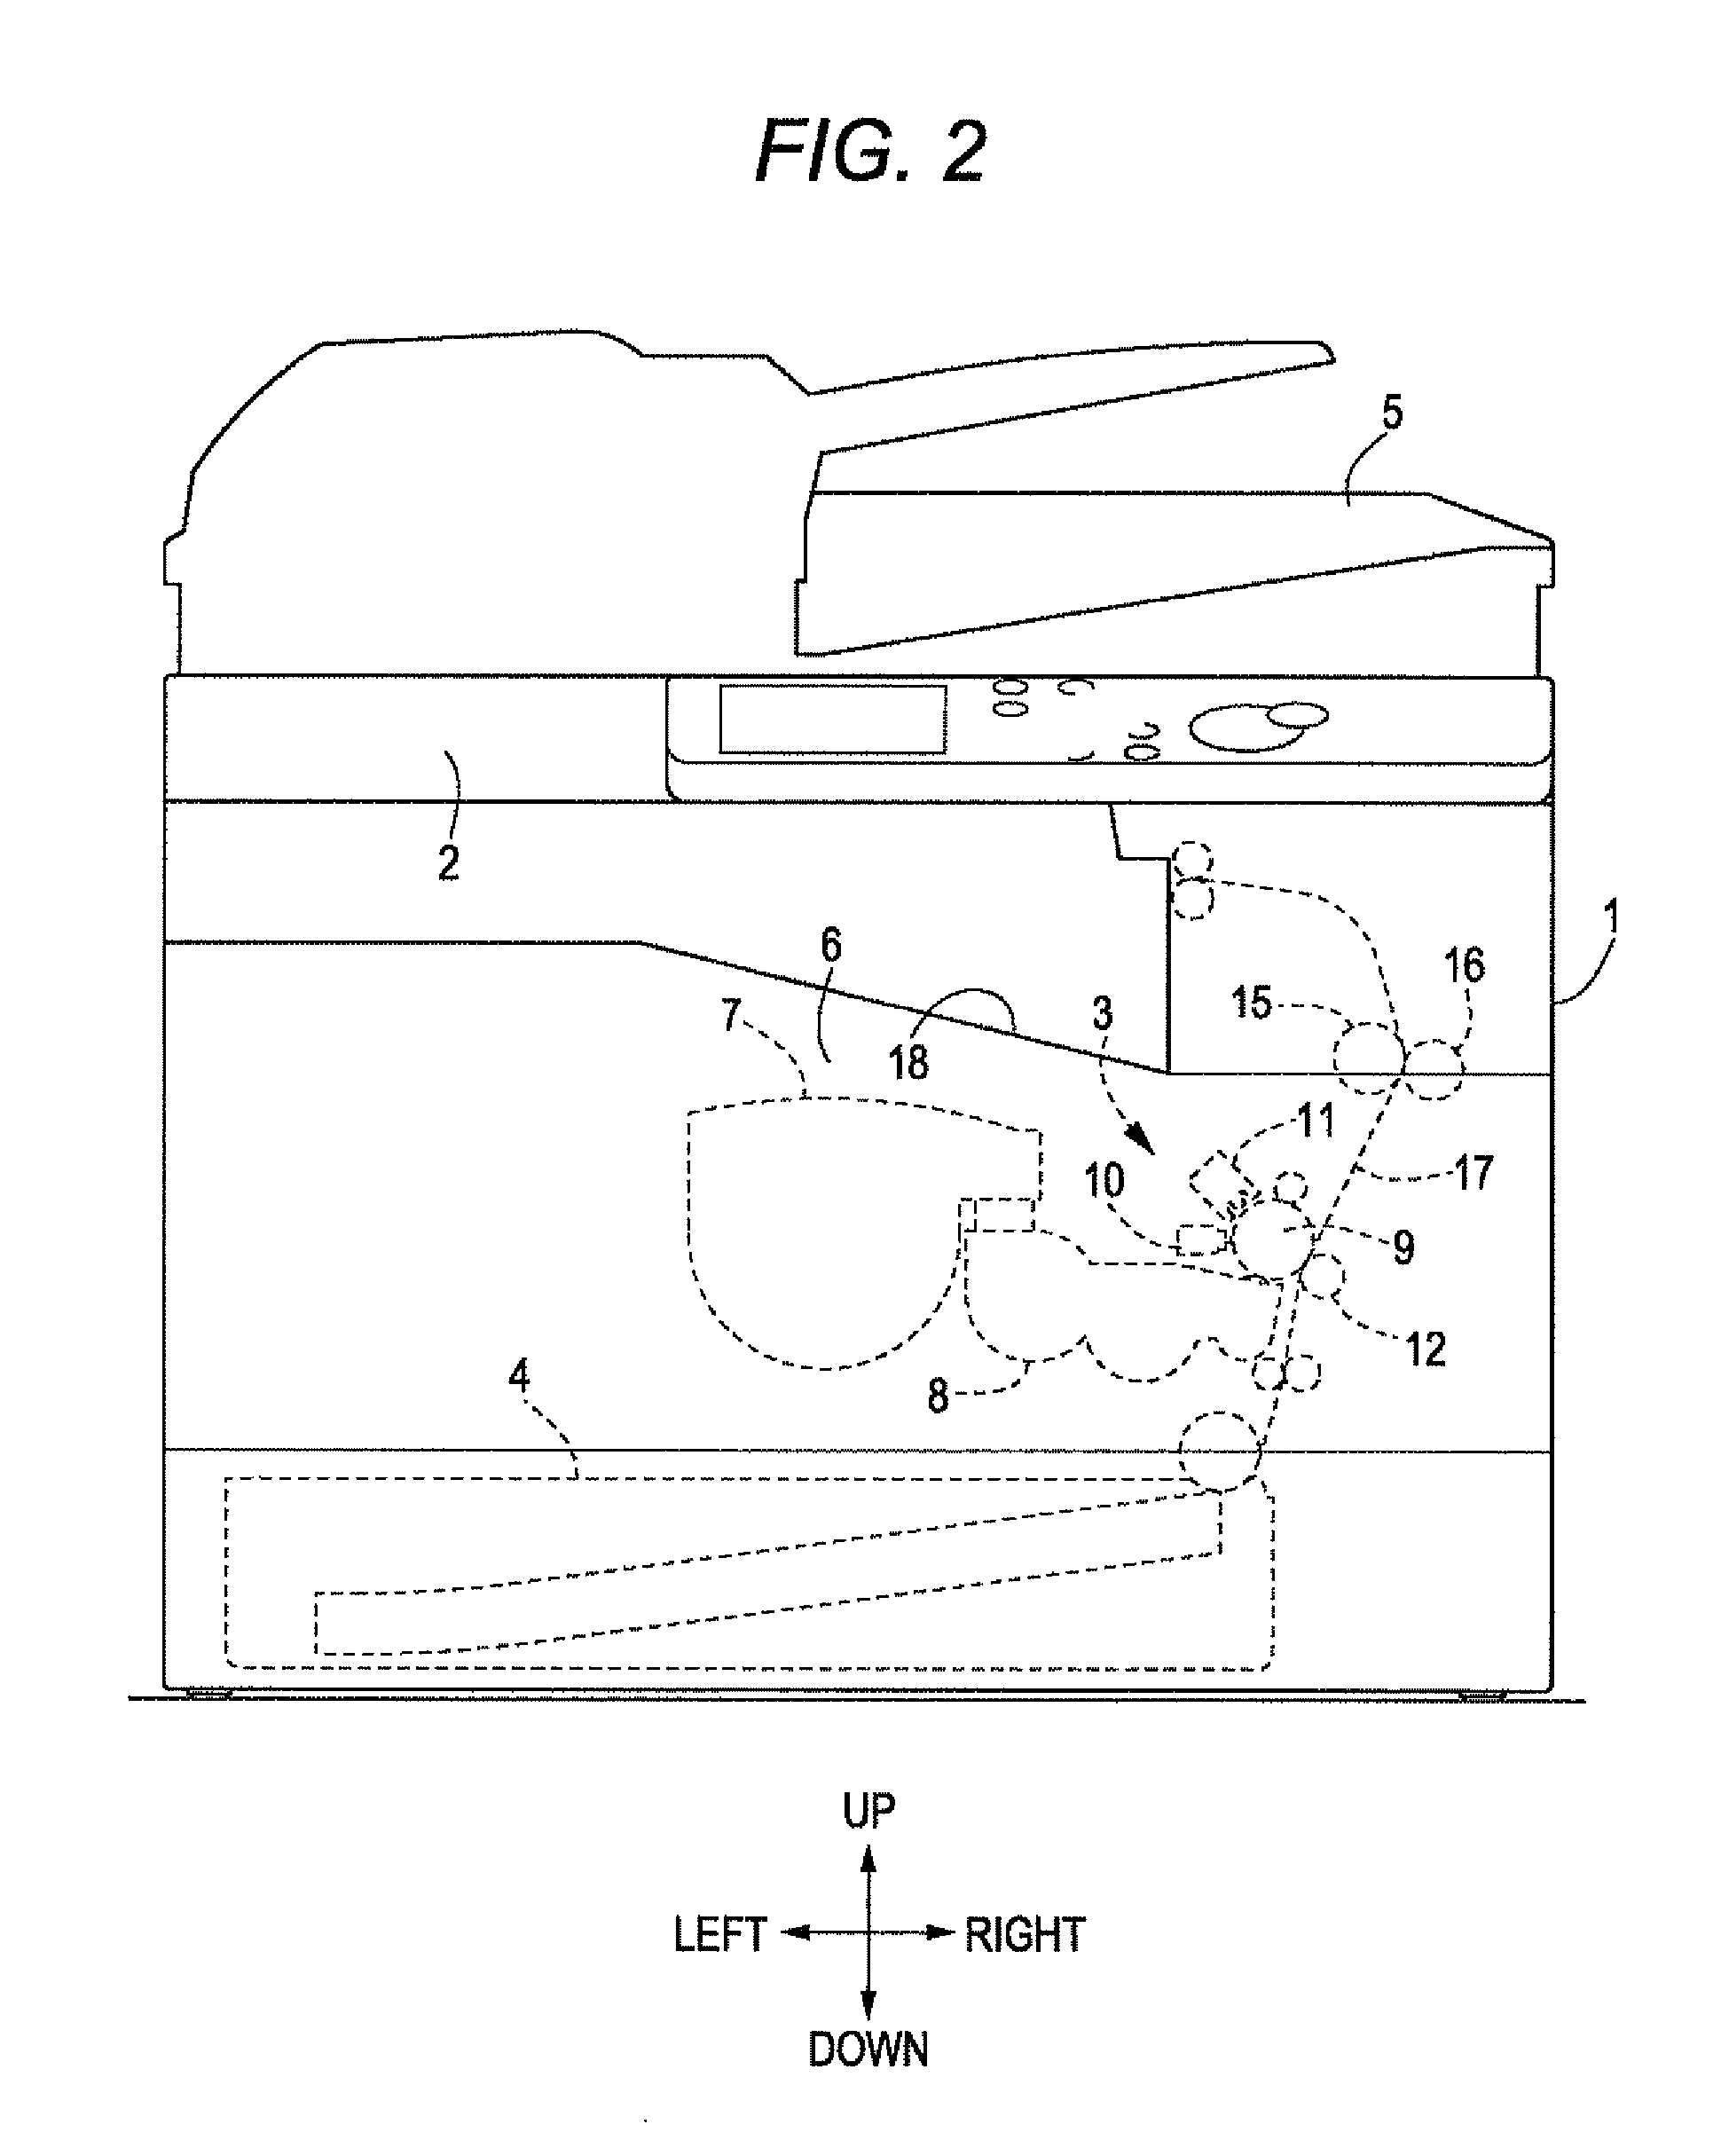 Image forming device